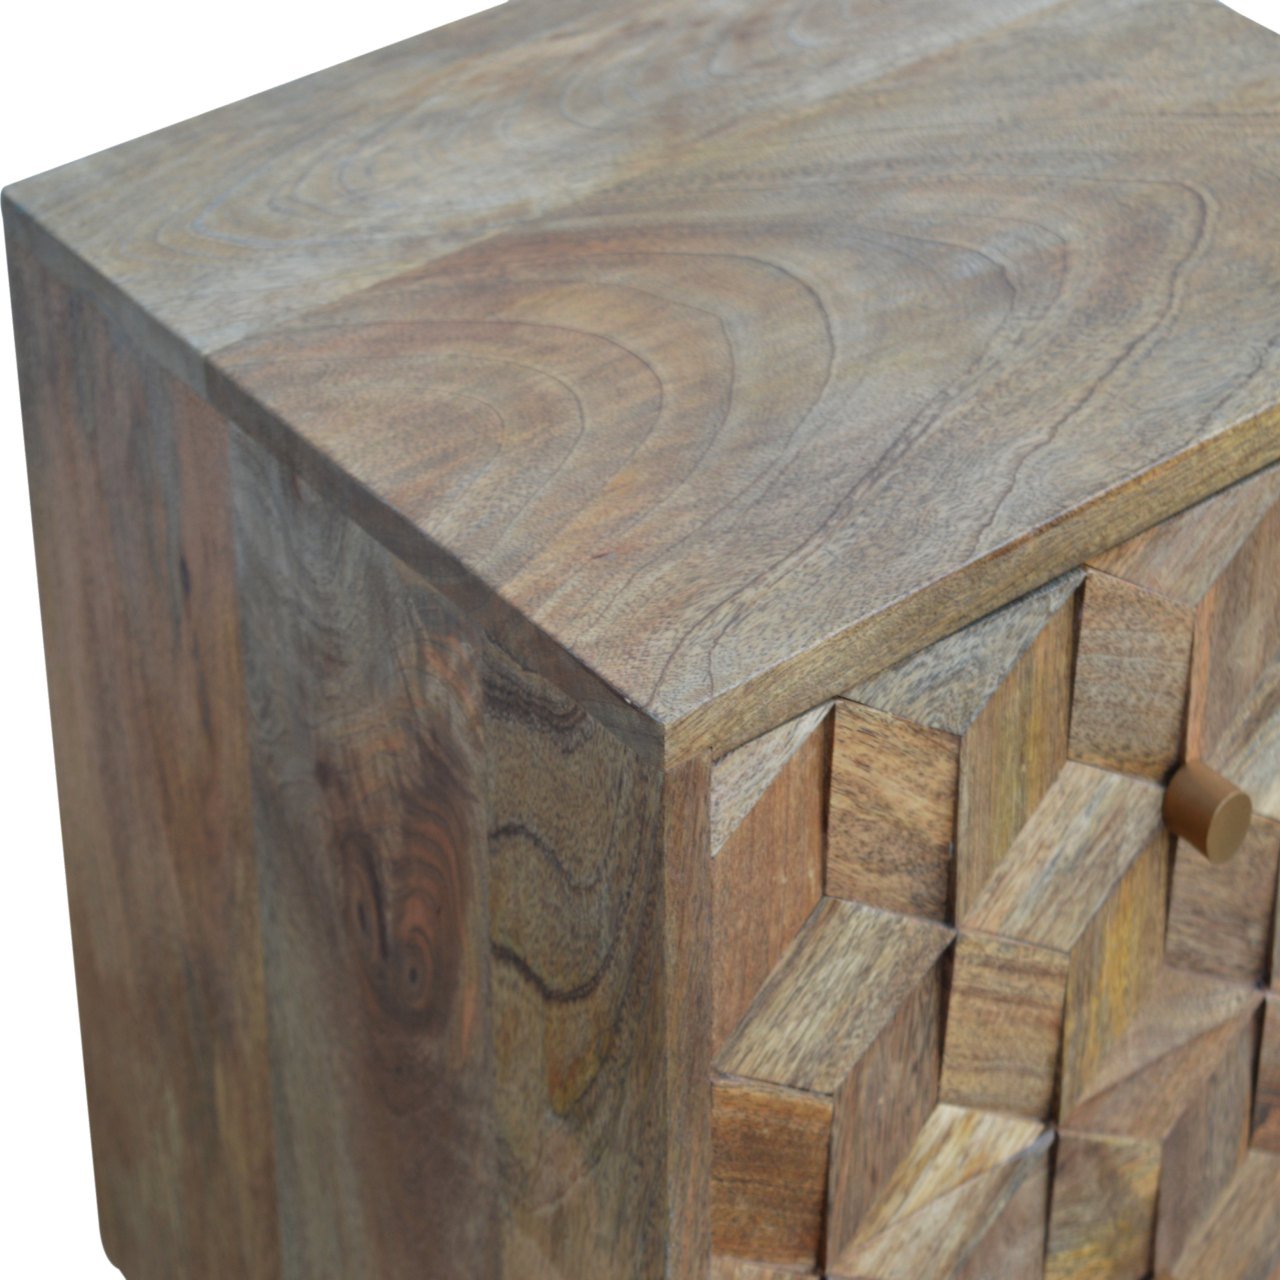 Cube Carved Bedside with 2 Drawers